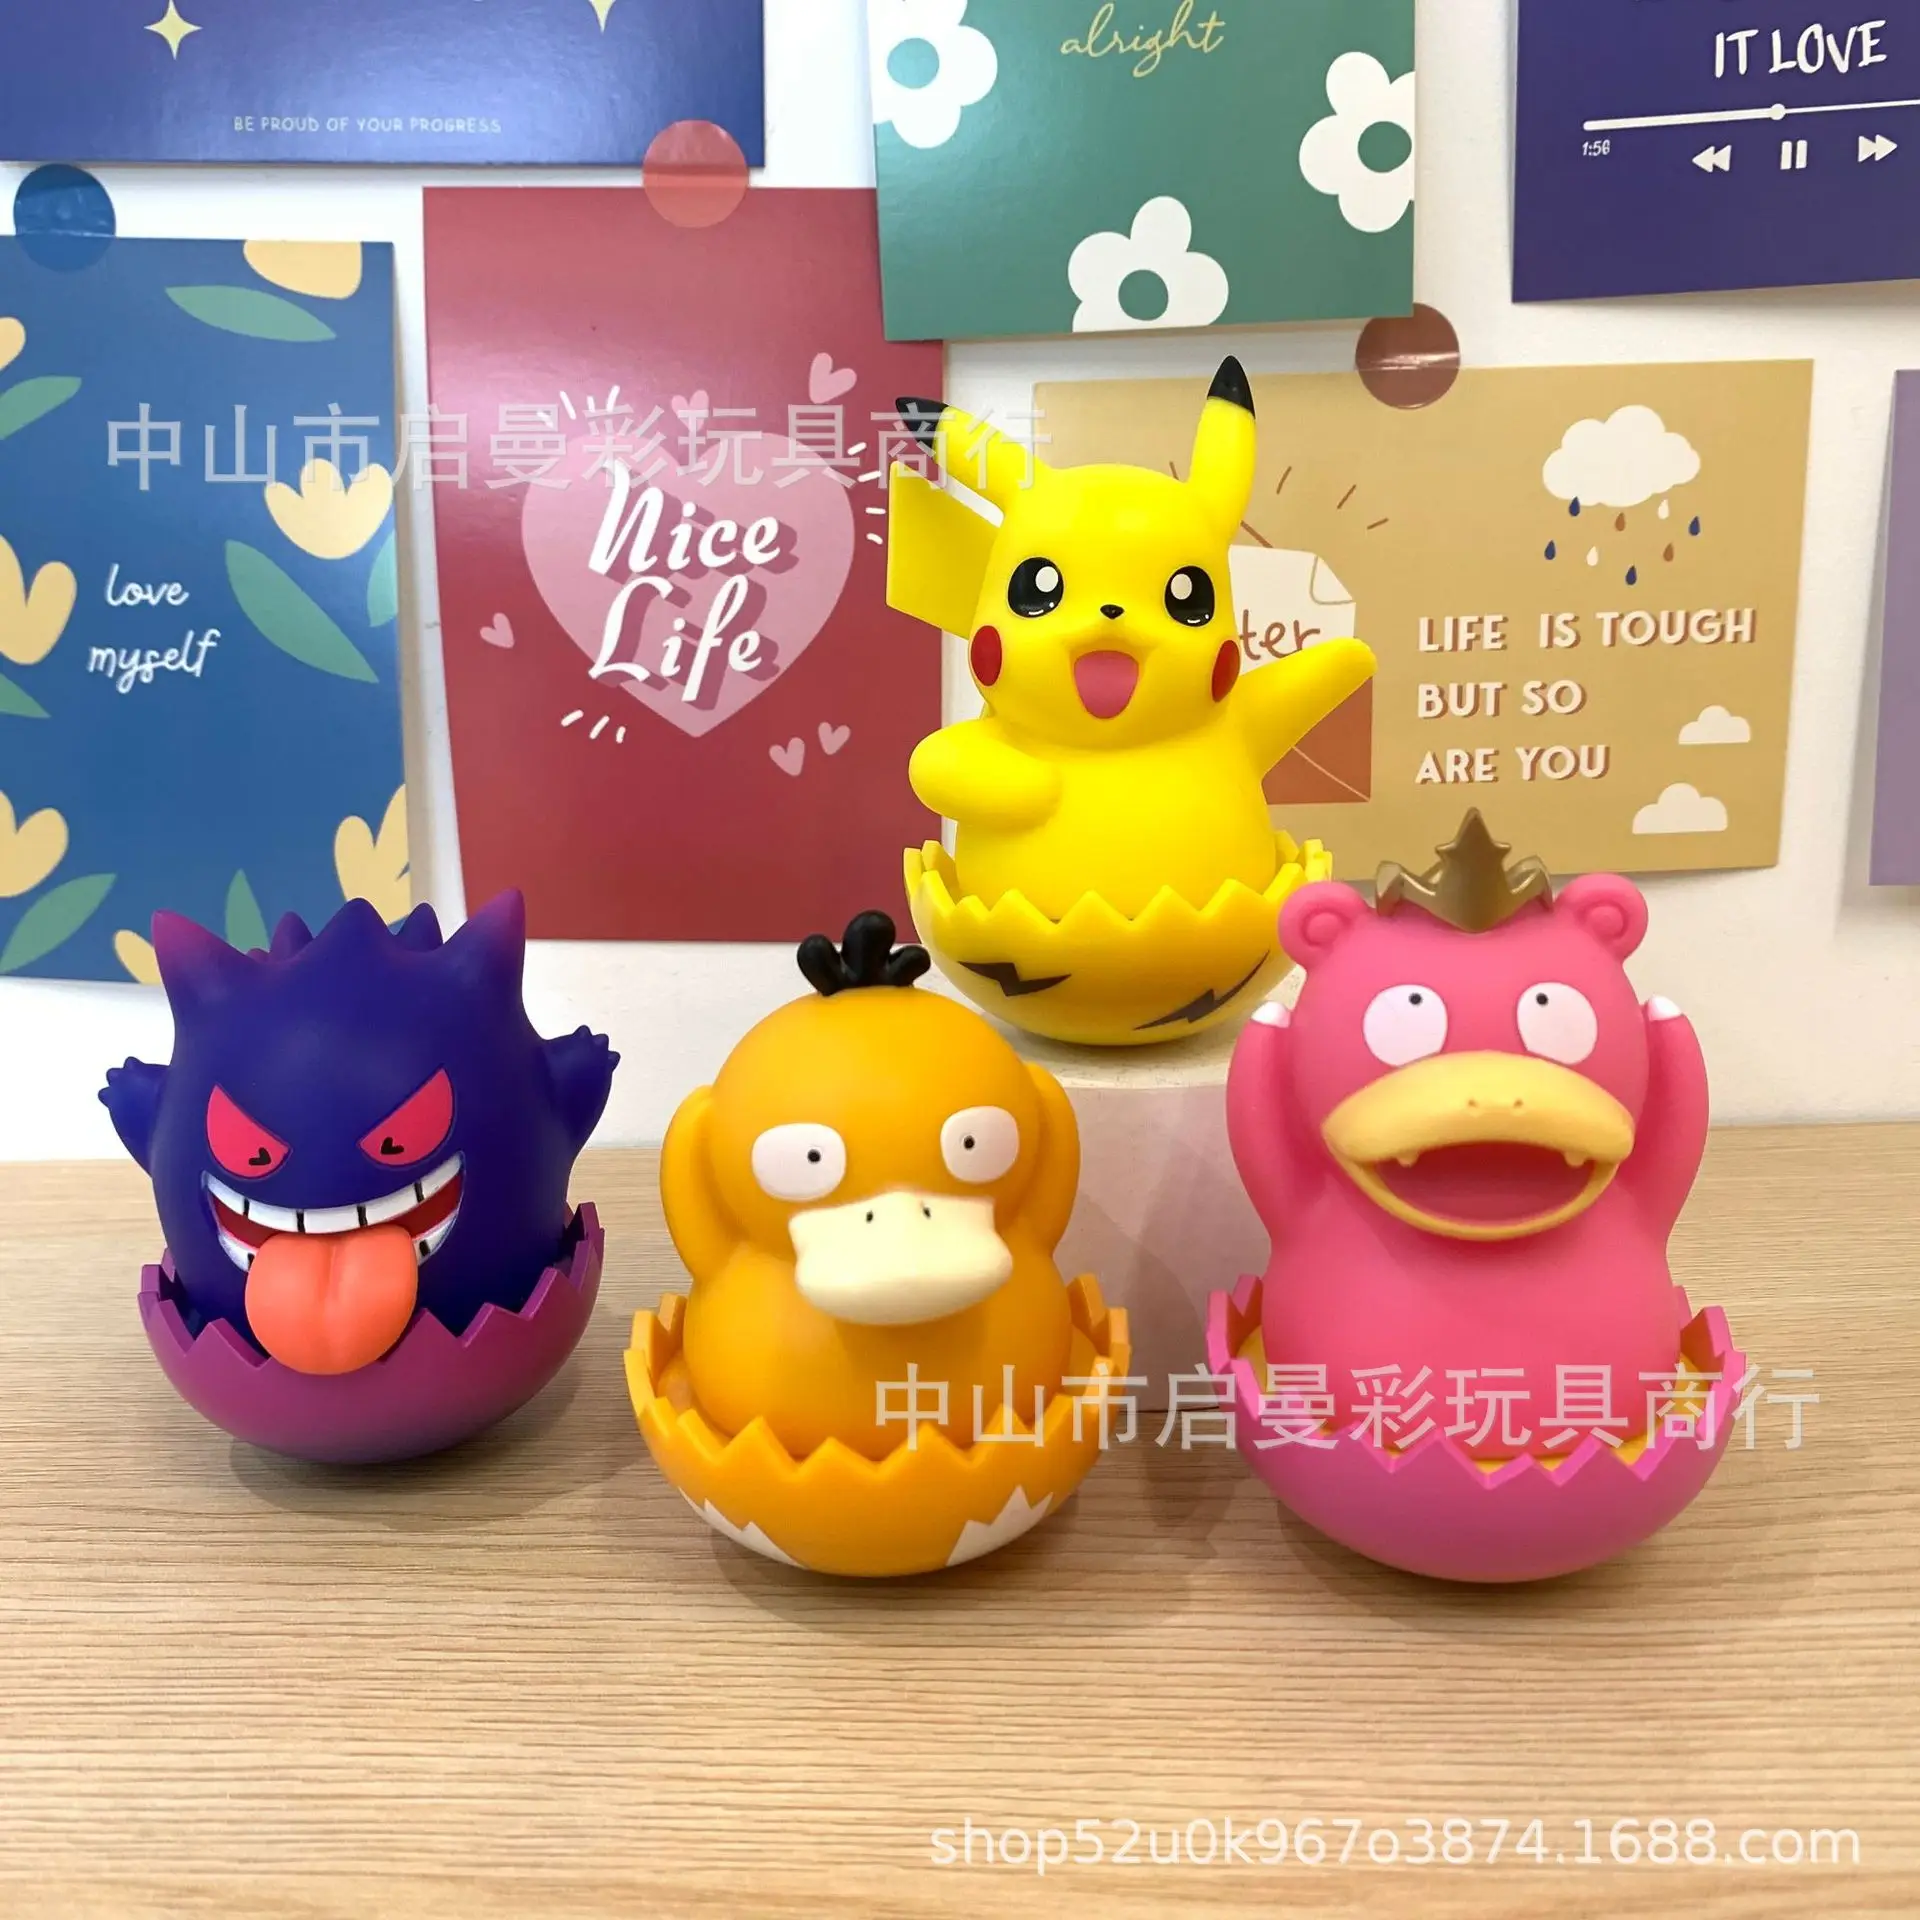 

New Pokemon cartoon tumbler 4pcs Picasso Psychuck Geng ghost model toy creative Action&Toy Figures children's birthday gift